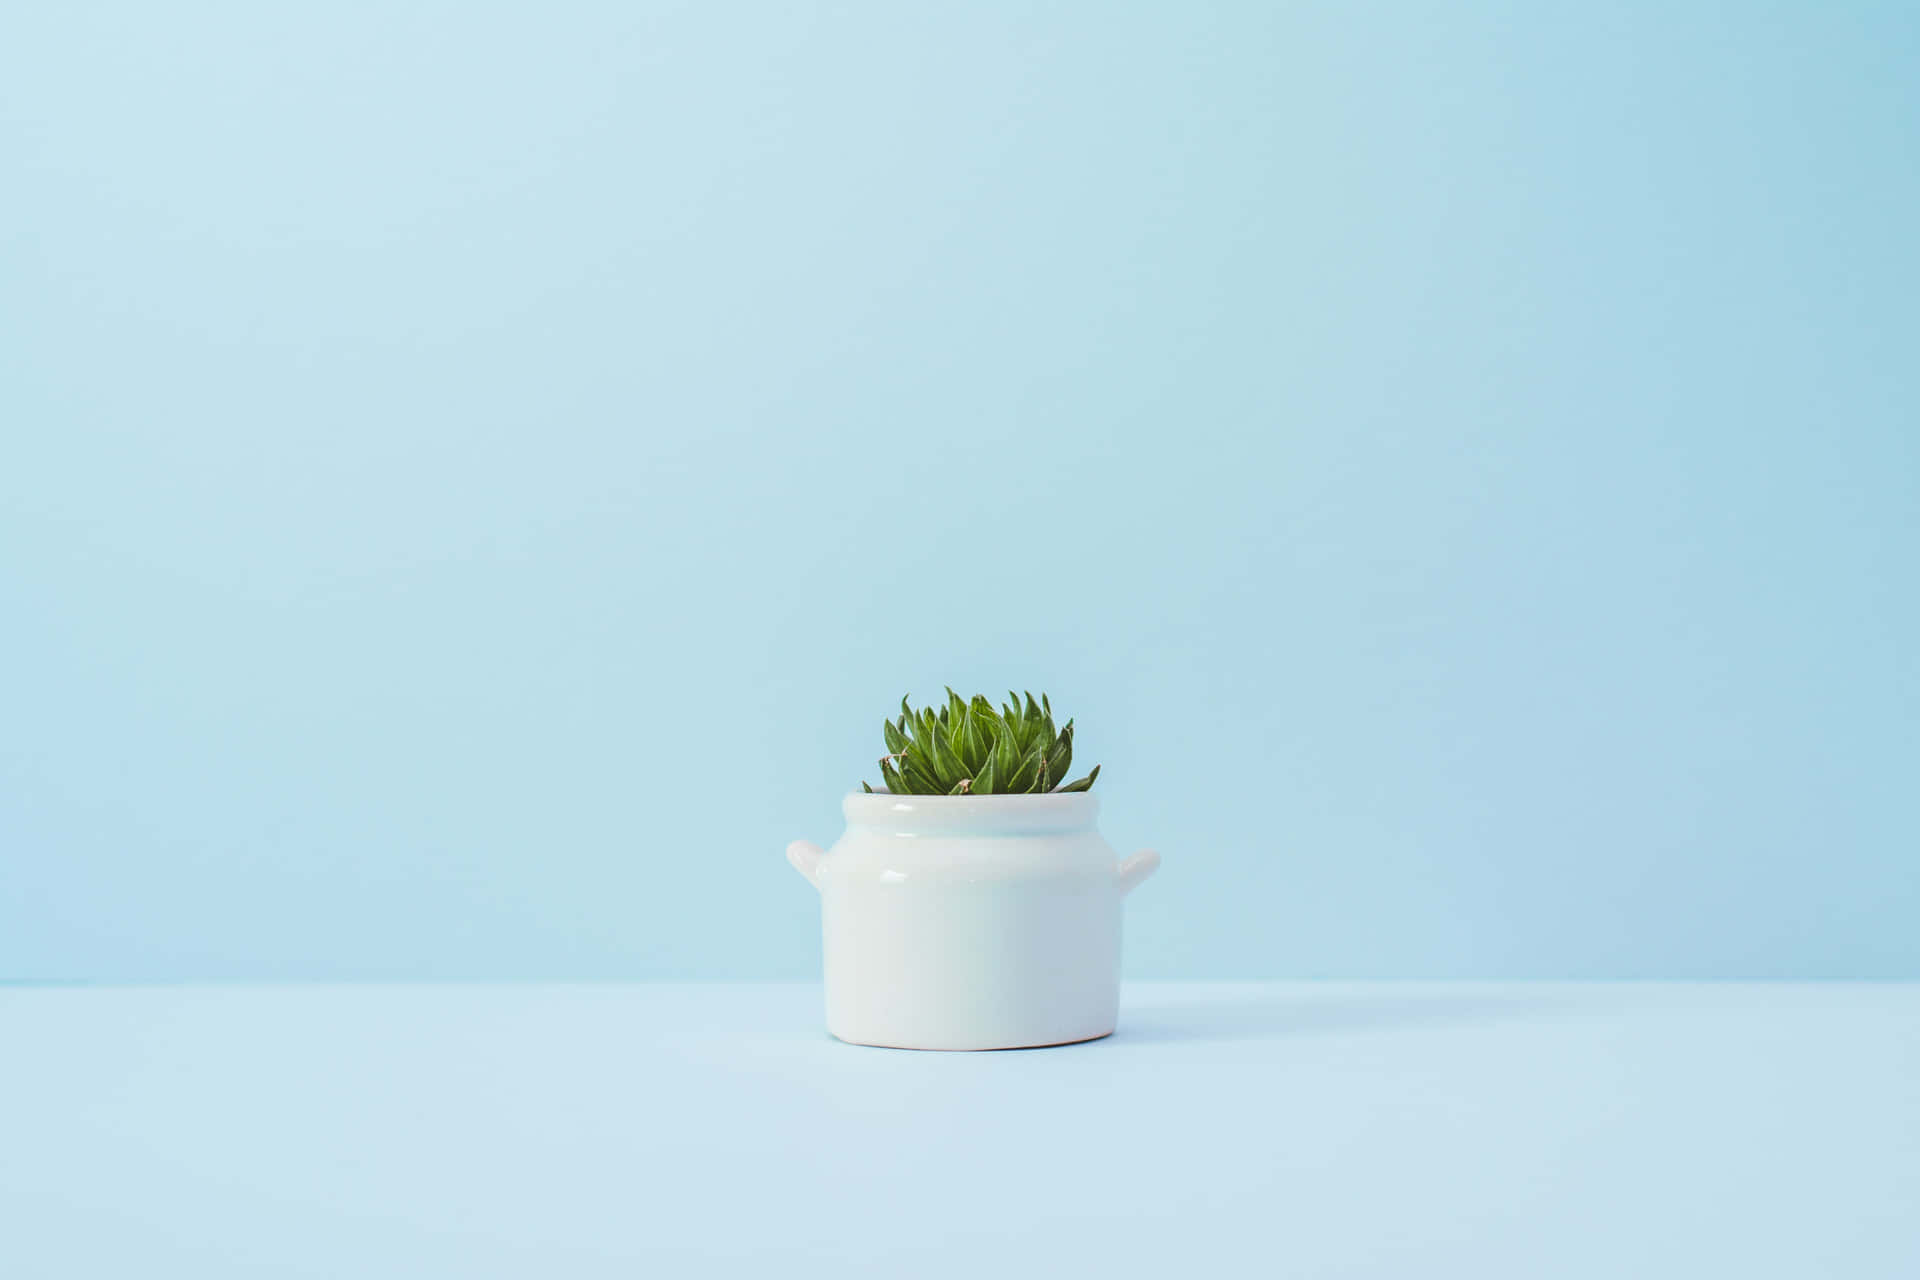 A Small Pot With A Plant On A Blue Background